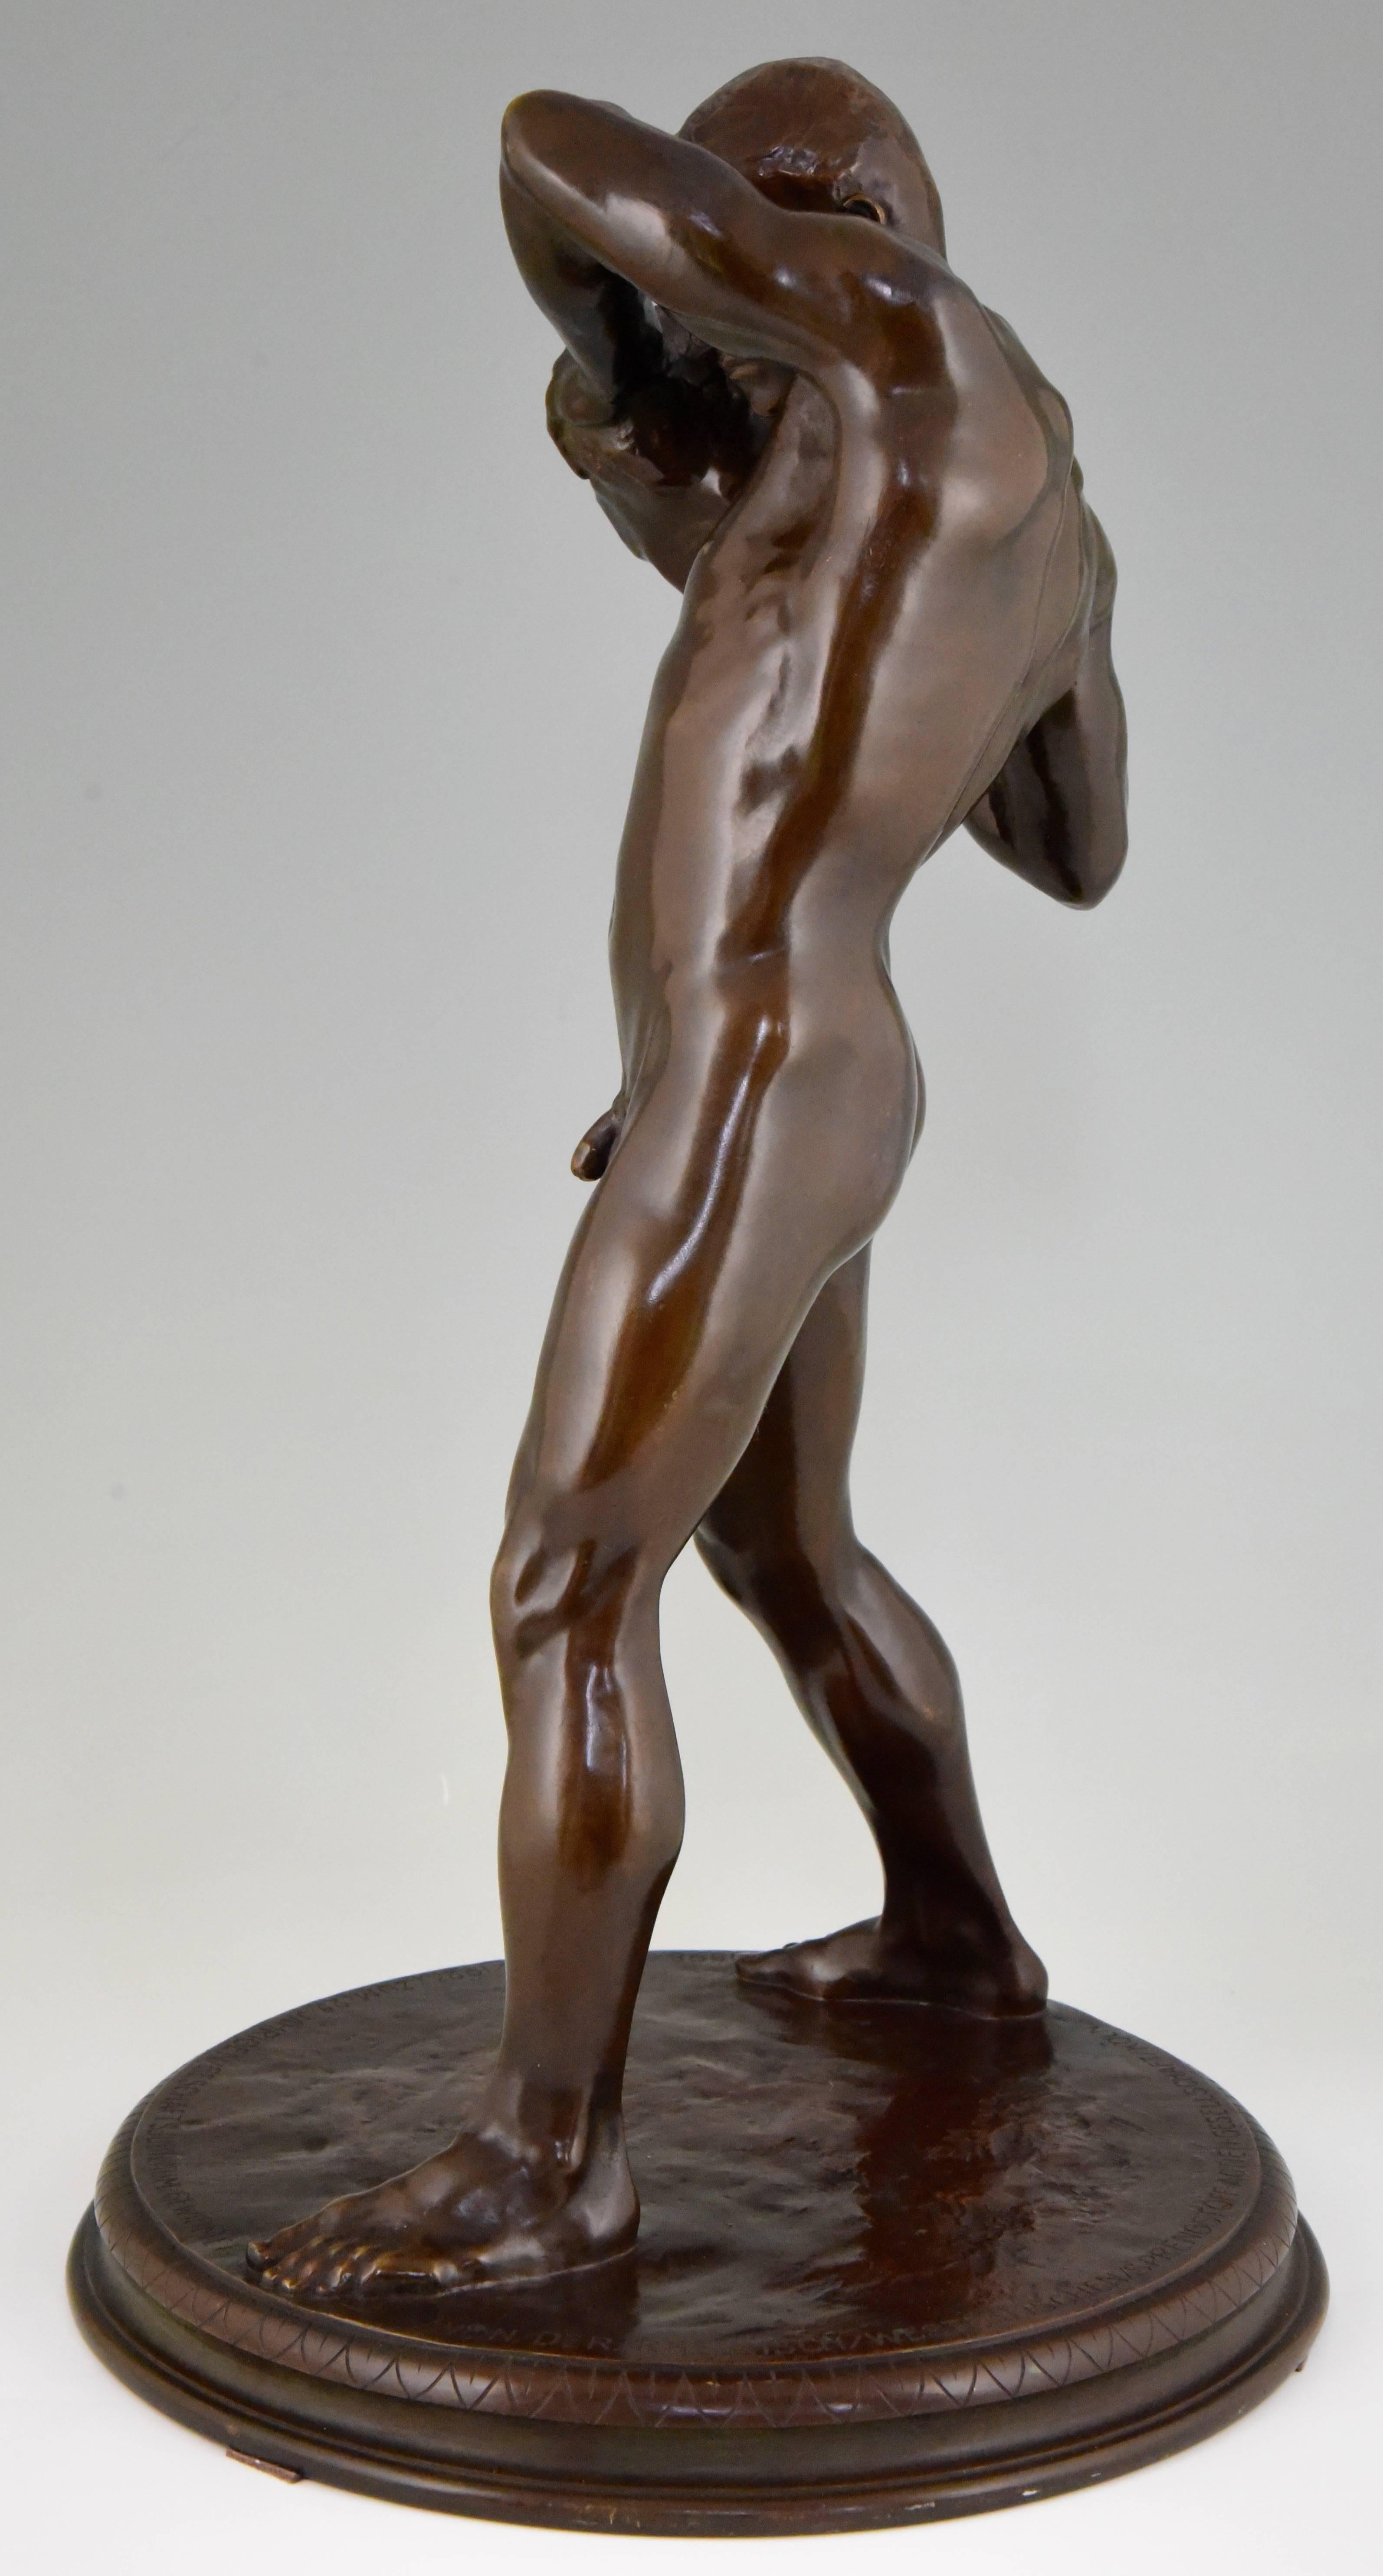 Patinated Antique Bronze Sculpture Male Nude Athlete by Paul Moye, 1923